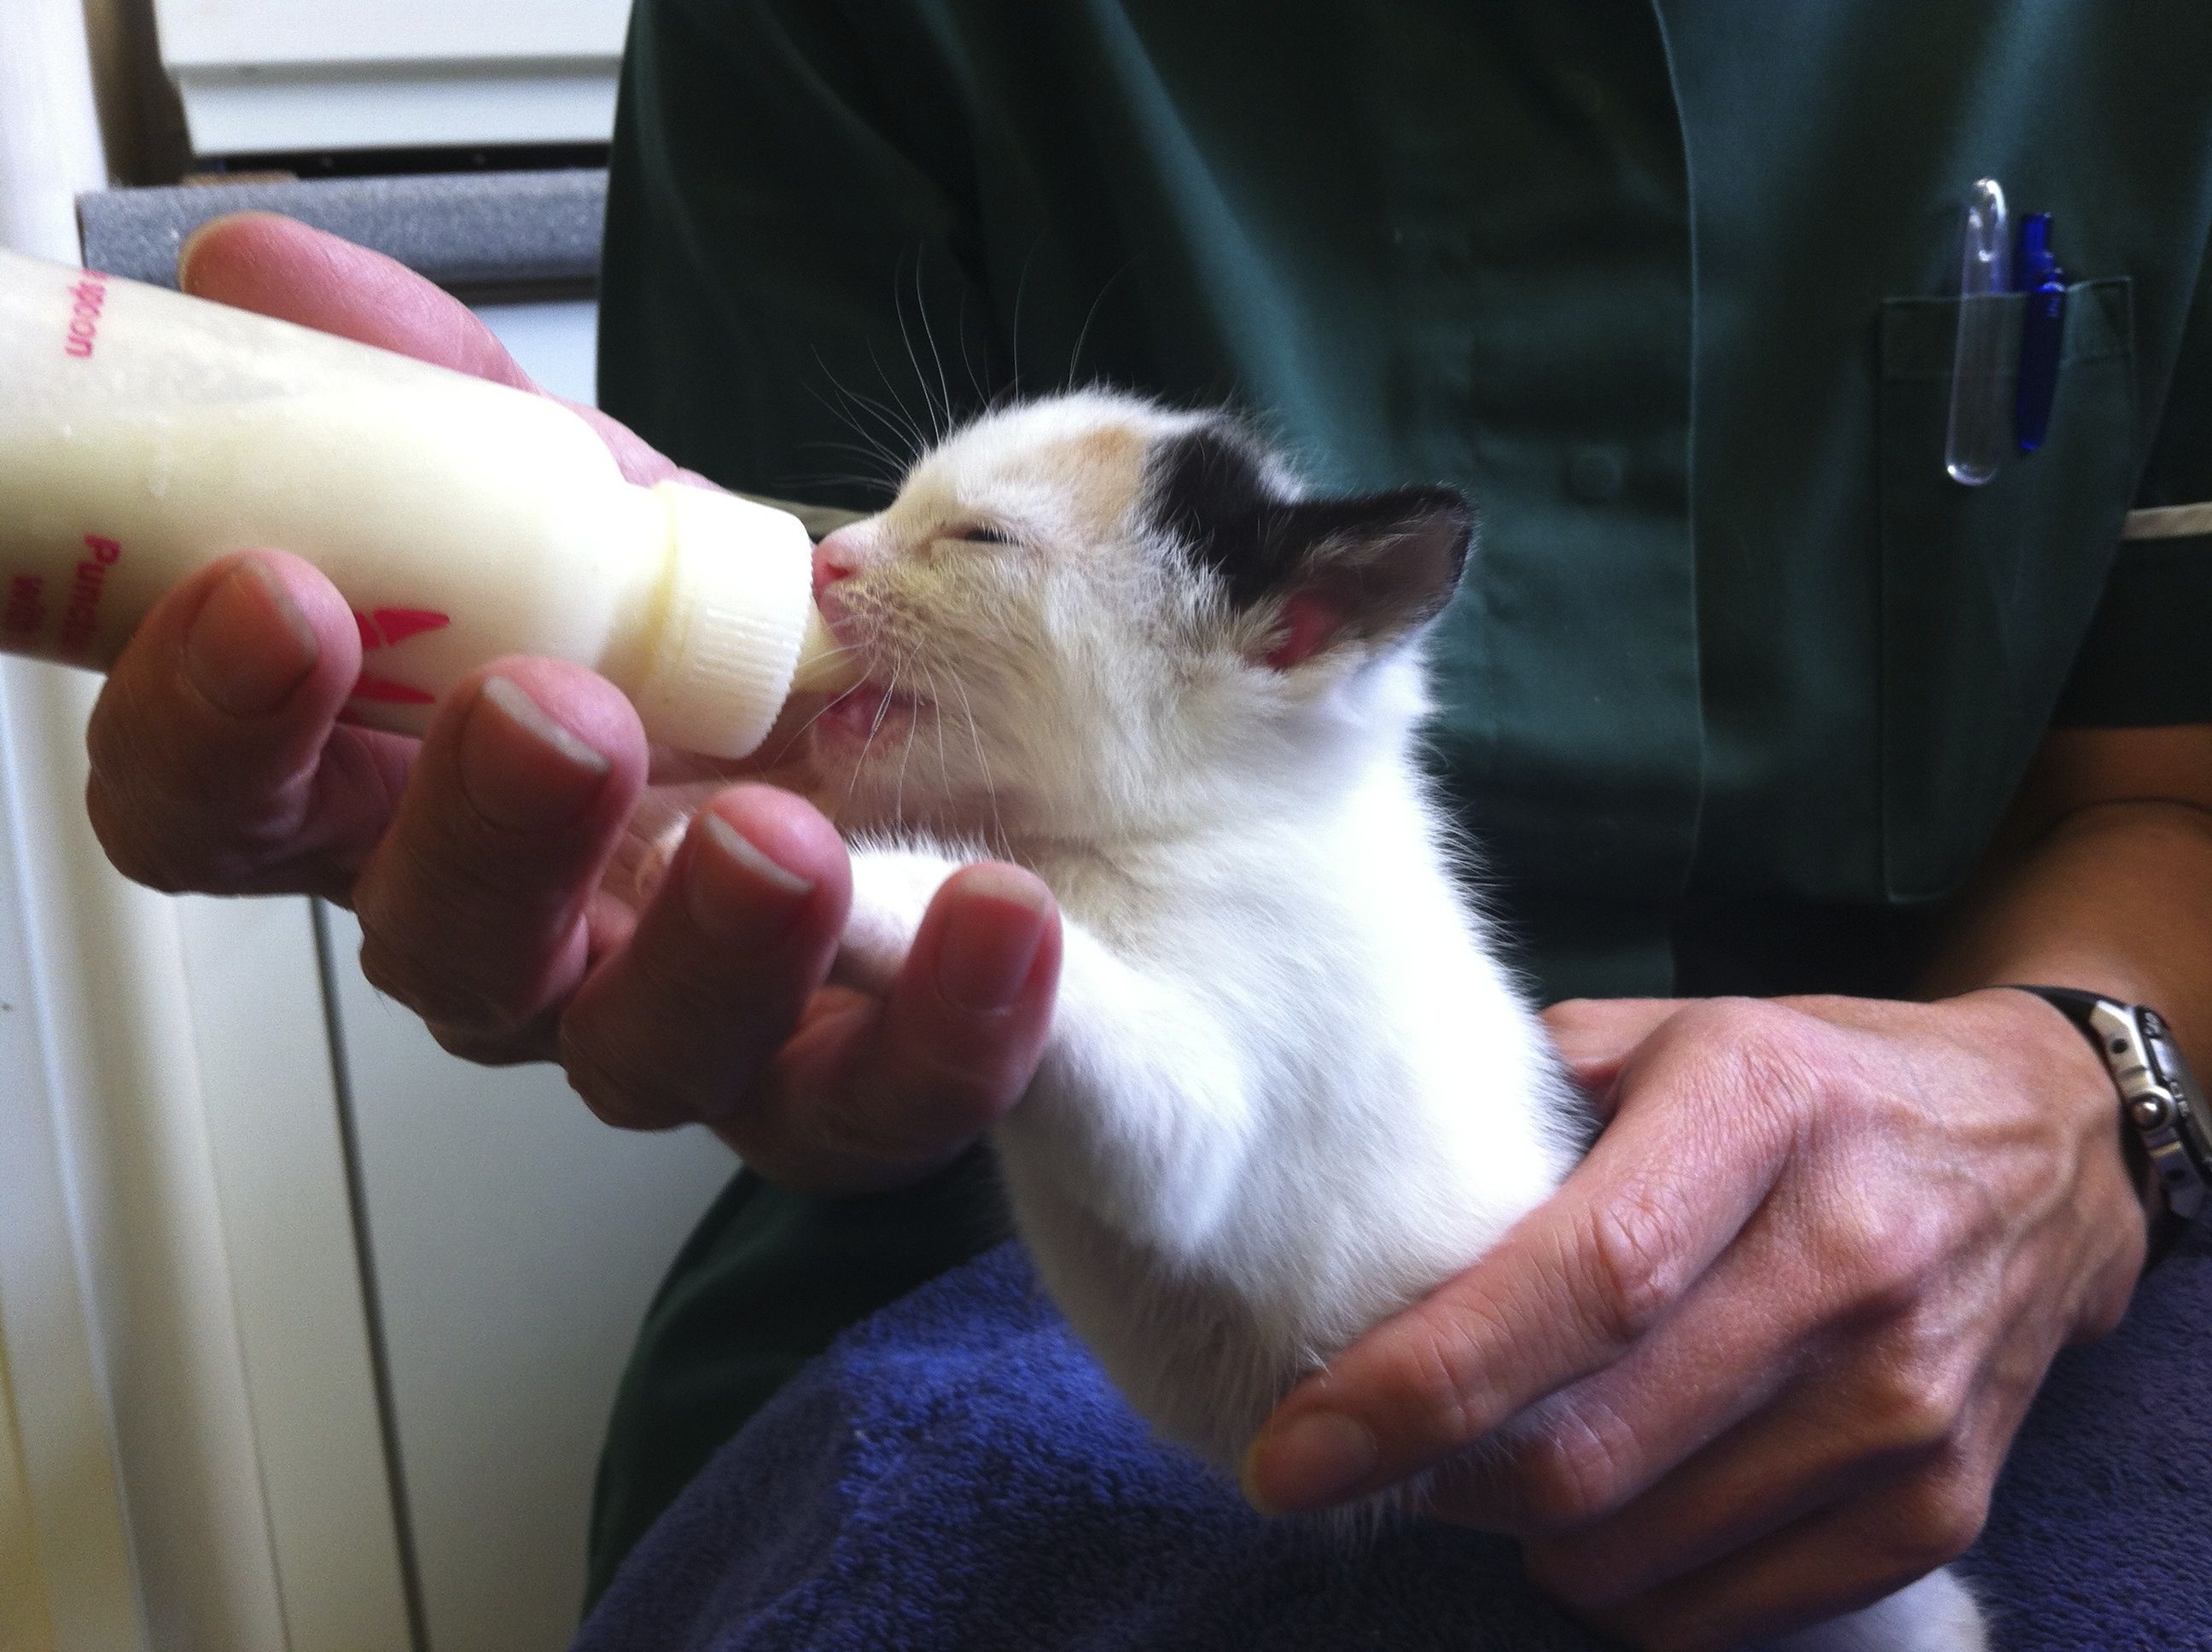 what can i feed a newborn kitten